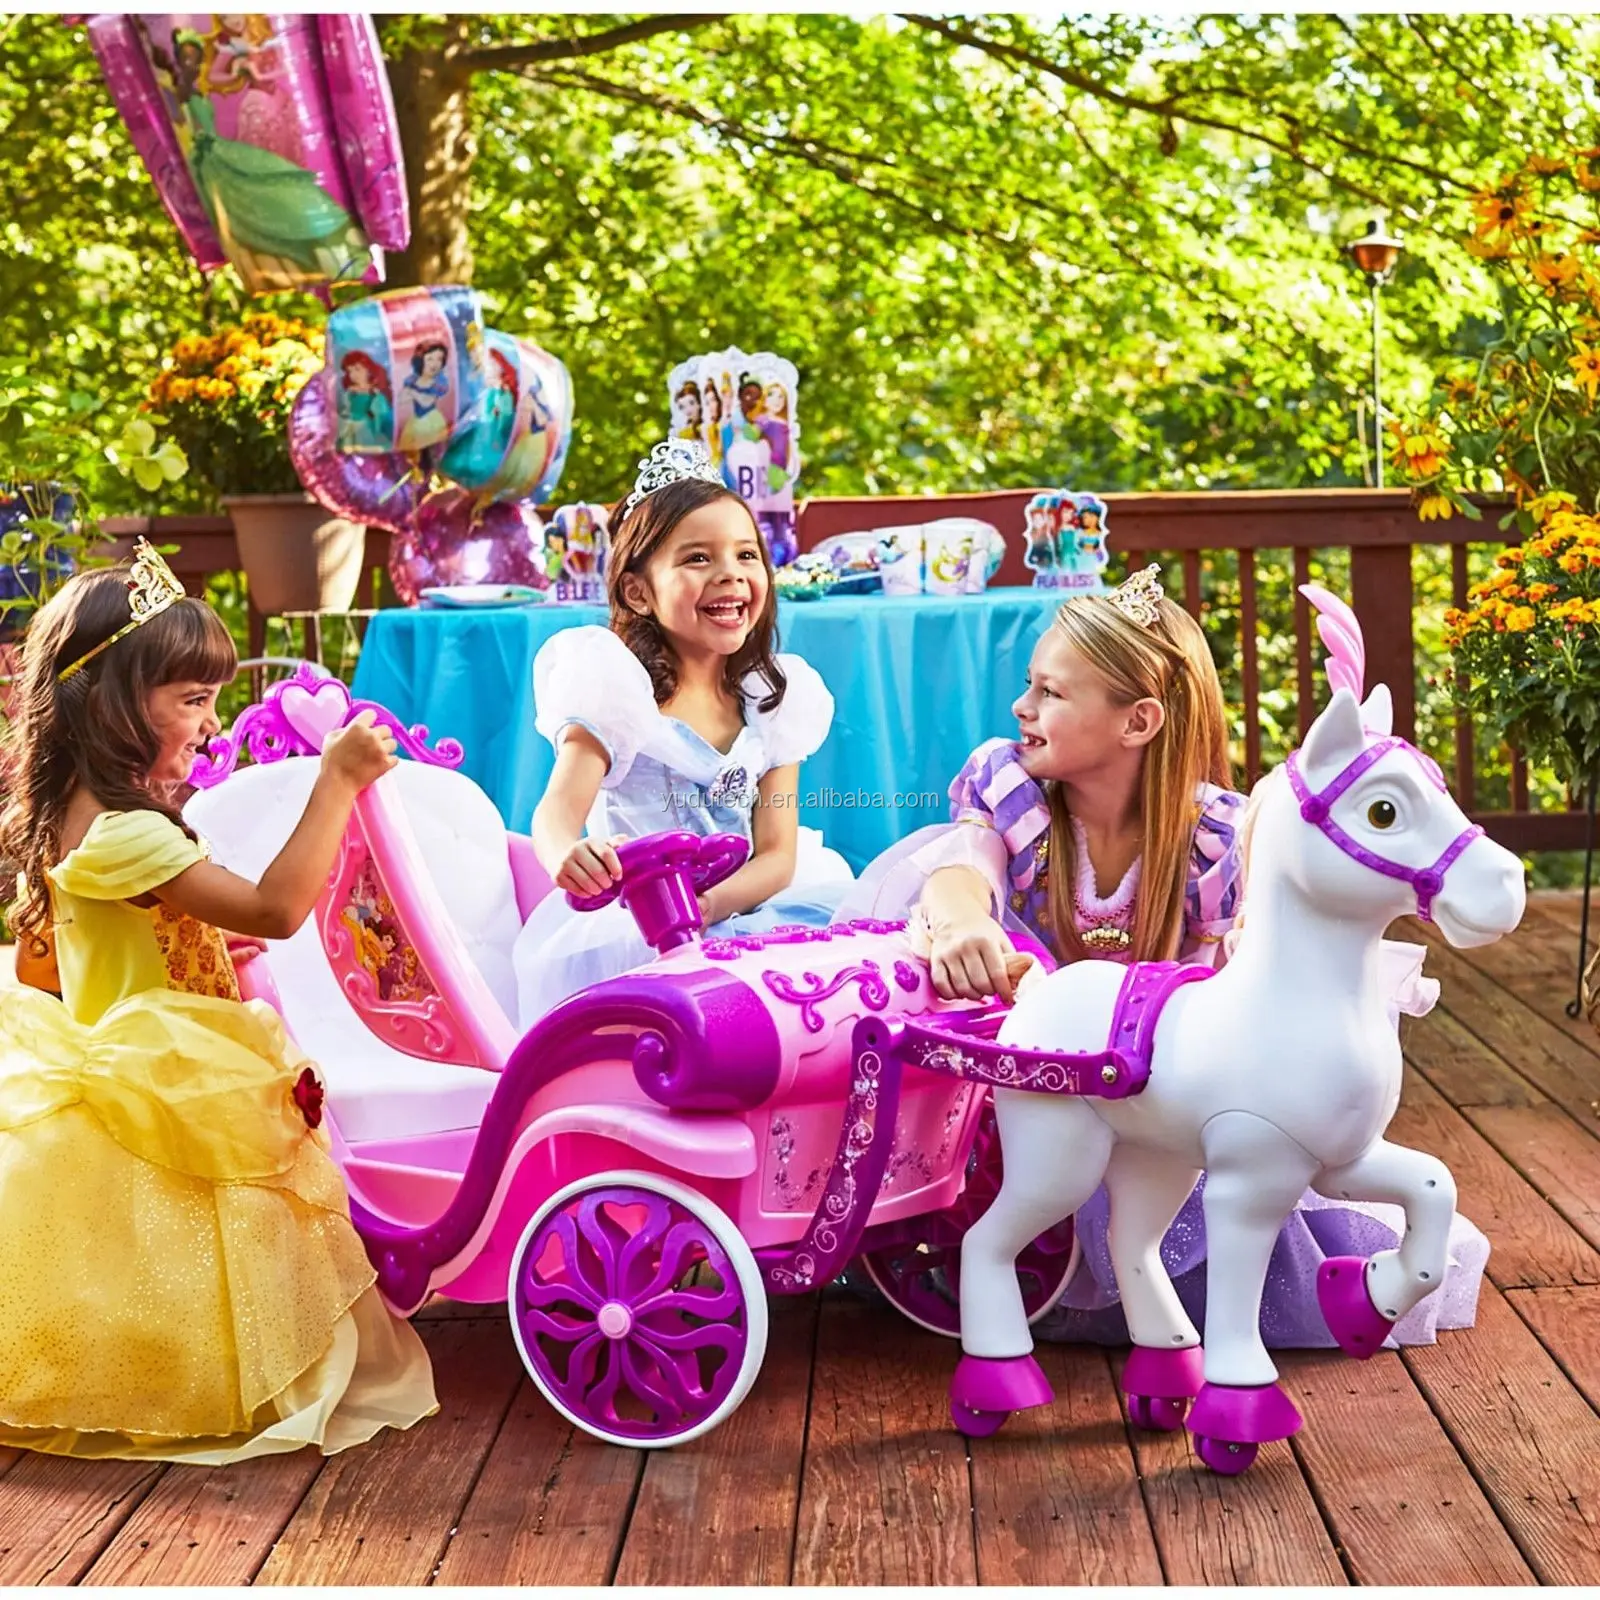 ride on horse and carriage toy